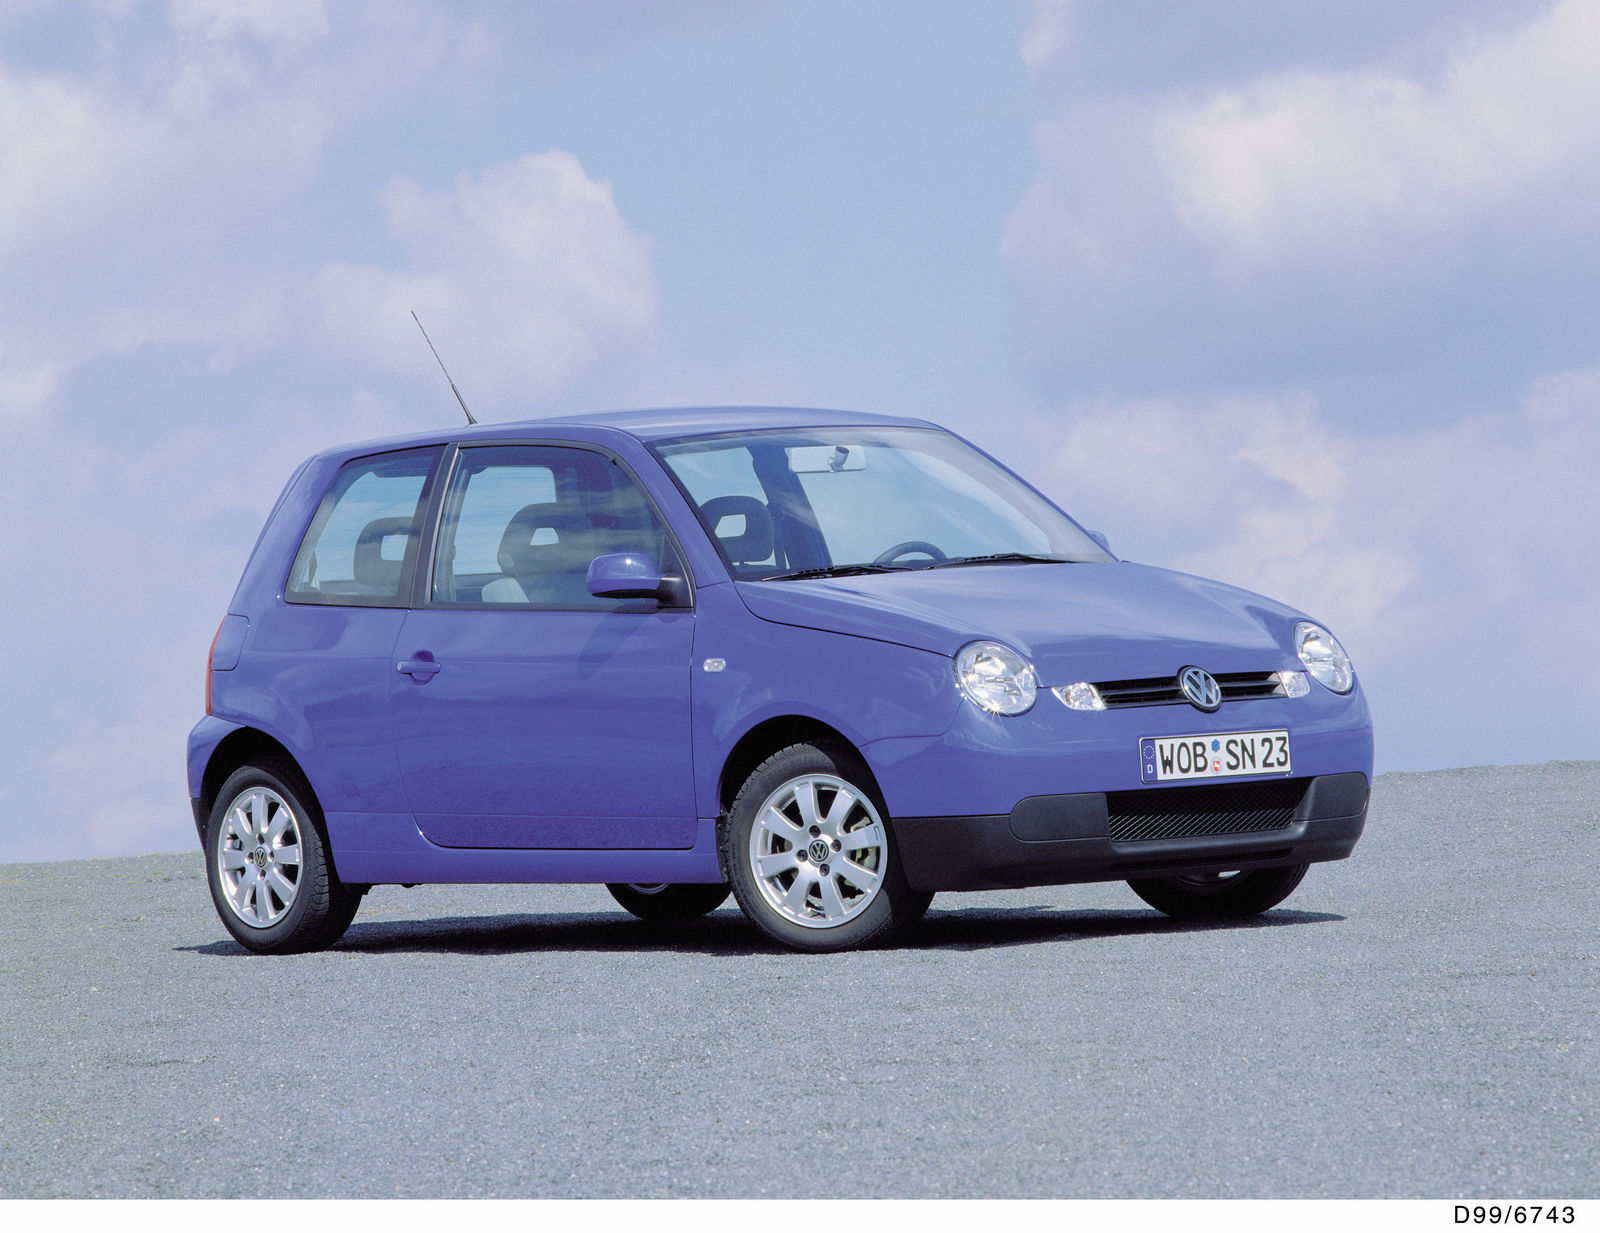 Product: Lupo (1999)